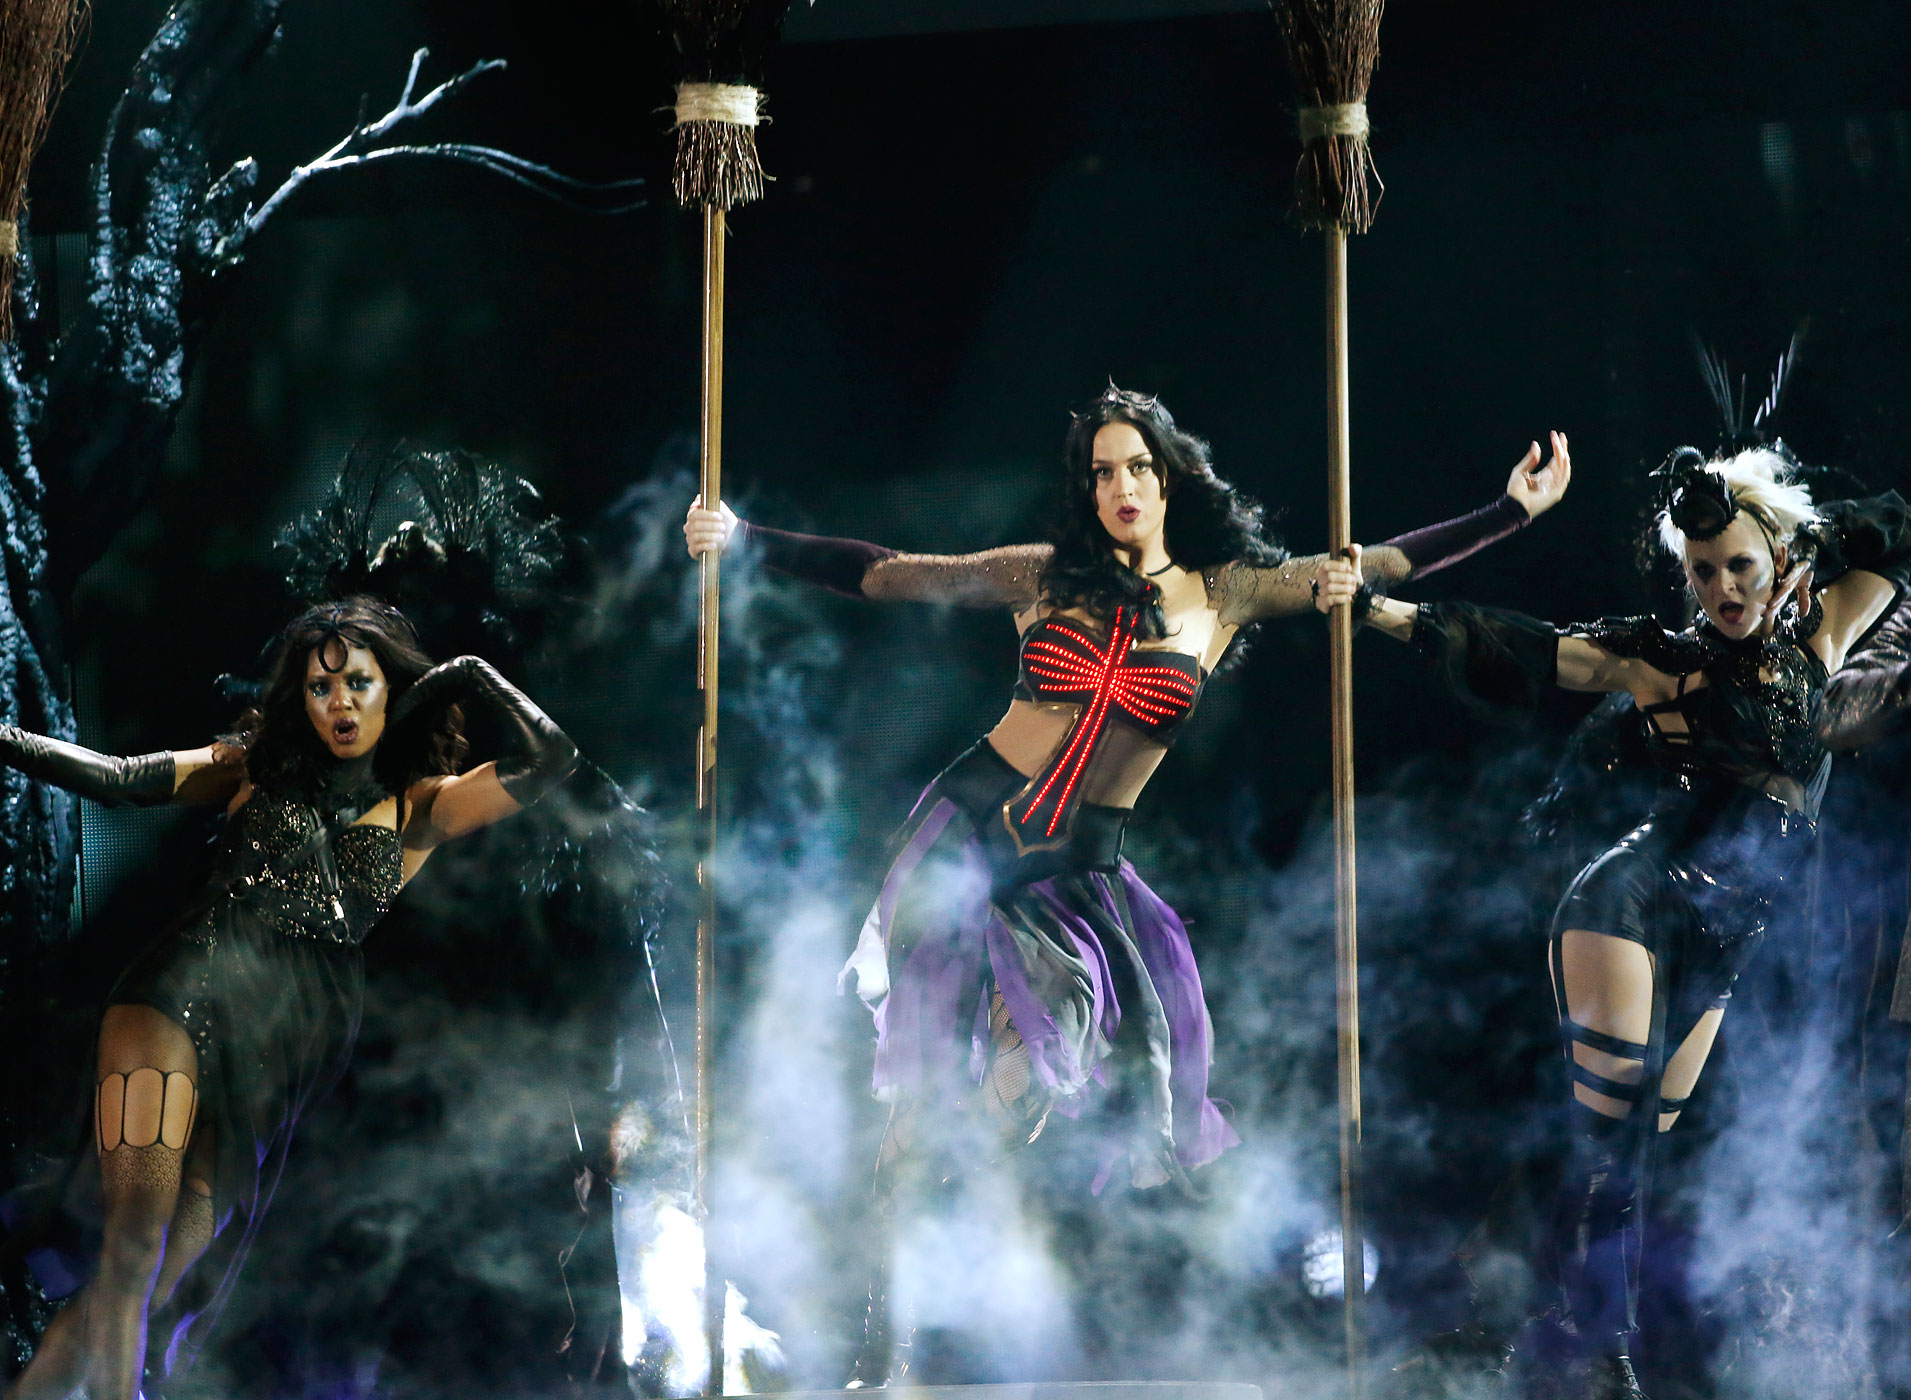 Katy Perry performs "Dark Horse" at the 56th annual Grammy Awards in Los Angeles